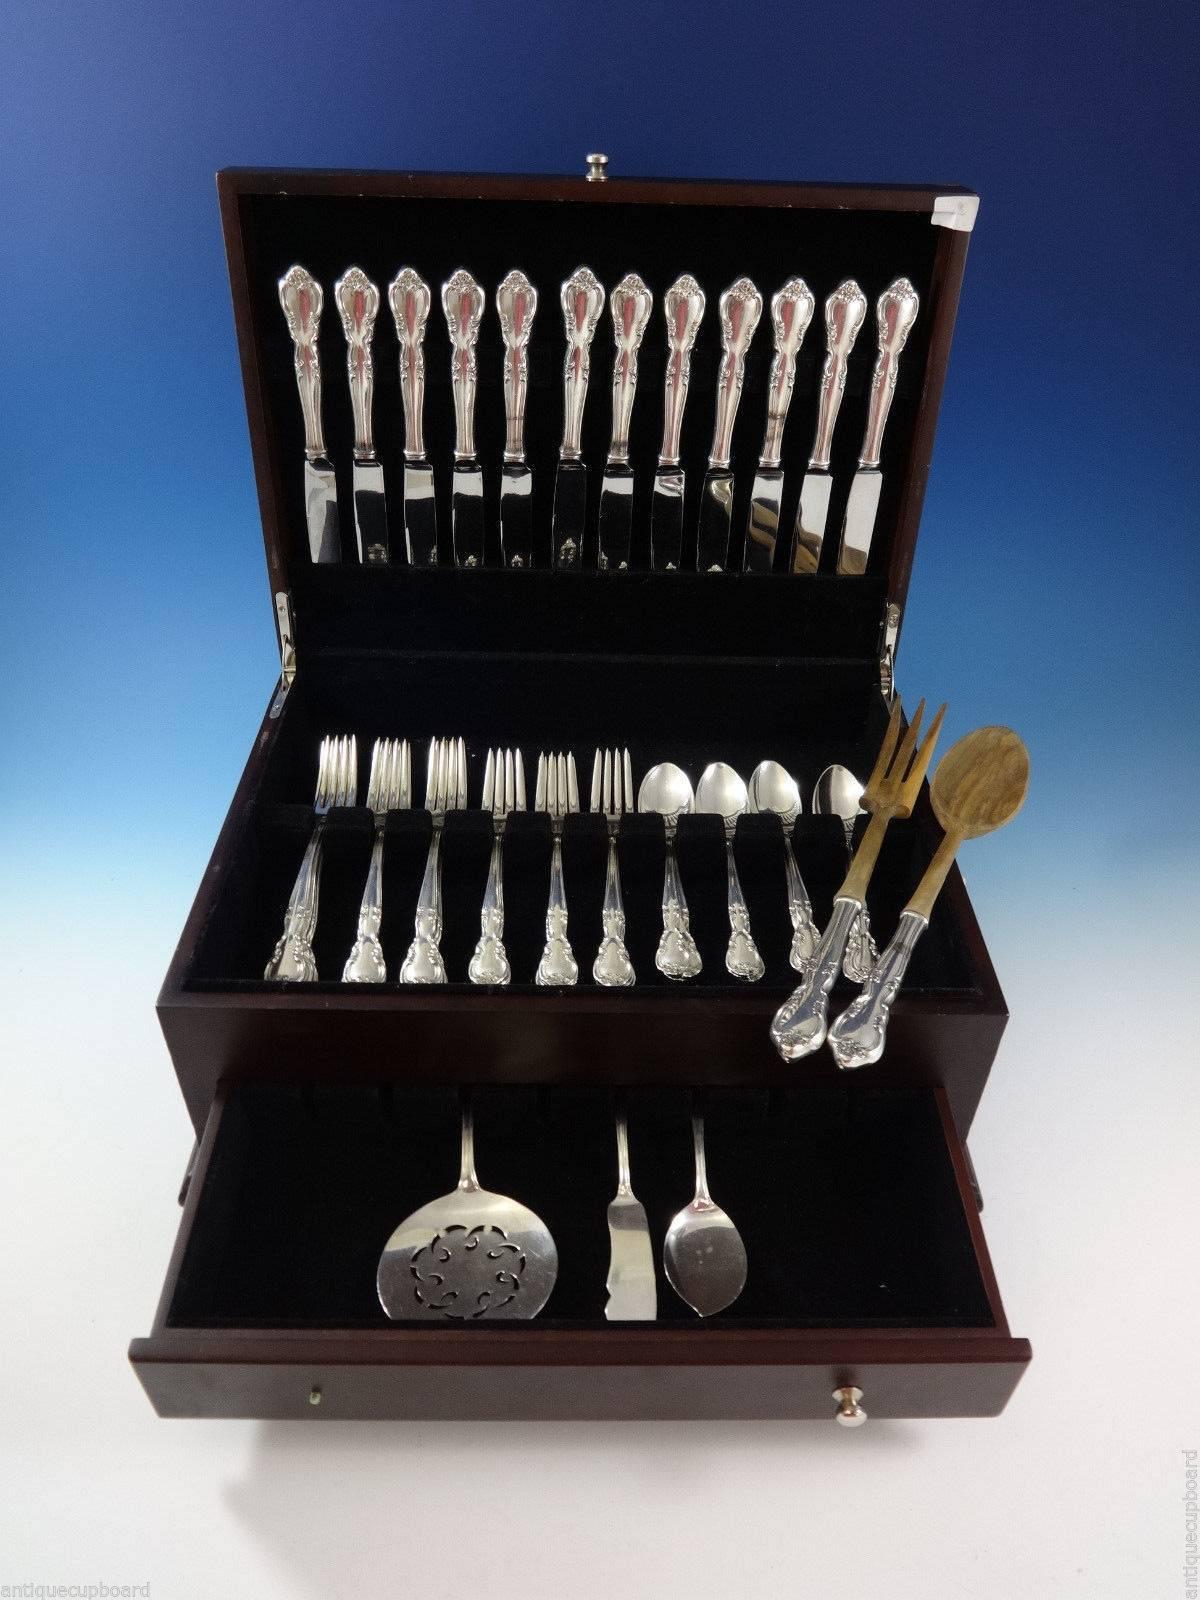 American Classic by Easterling sterling silver flatware set 53 pieces. This set includes: 

12 knives, 8 7/8